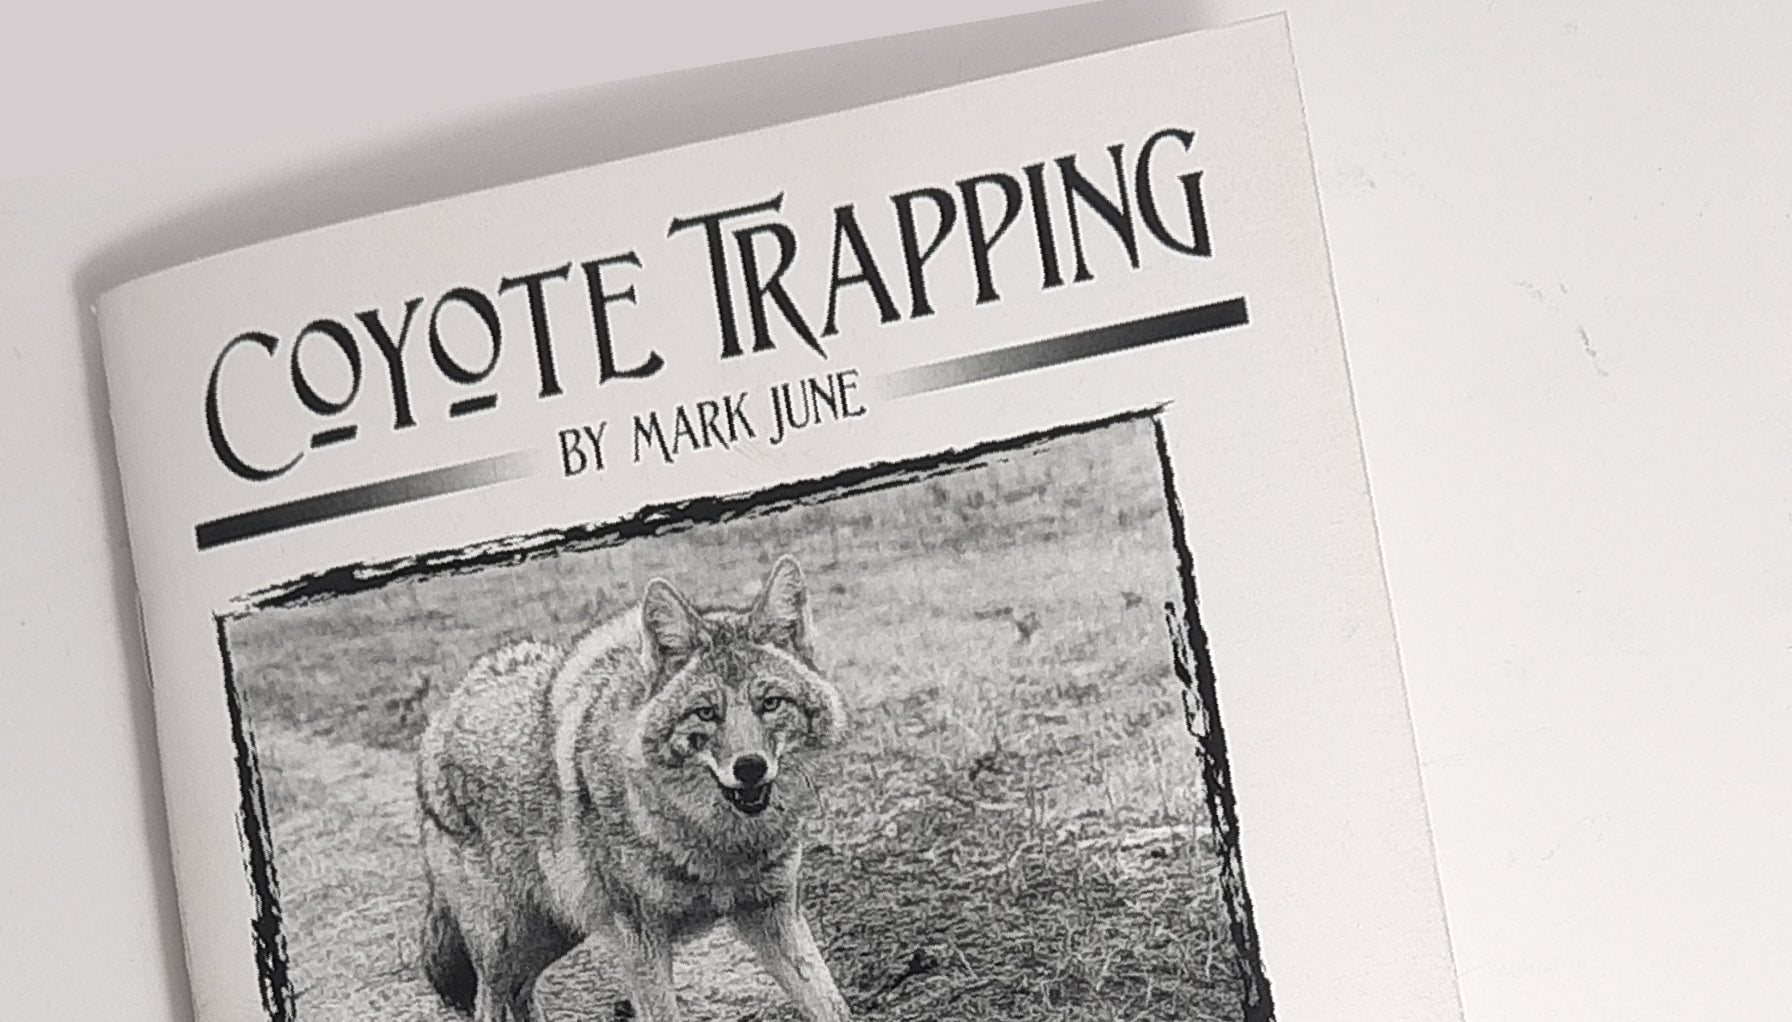 coyote_trapping_1 - IronTrail Trapline Supply, LLC